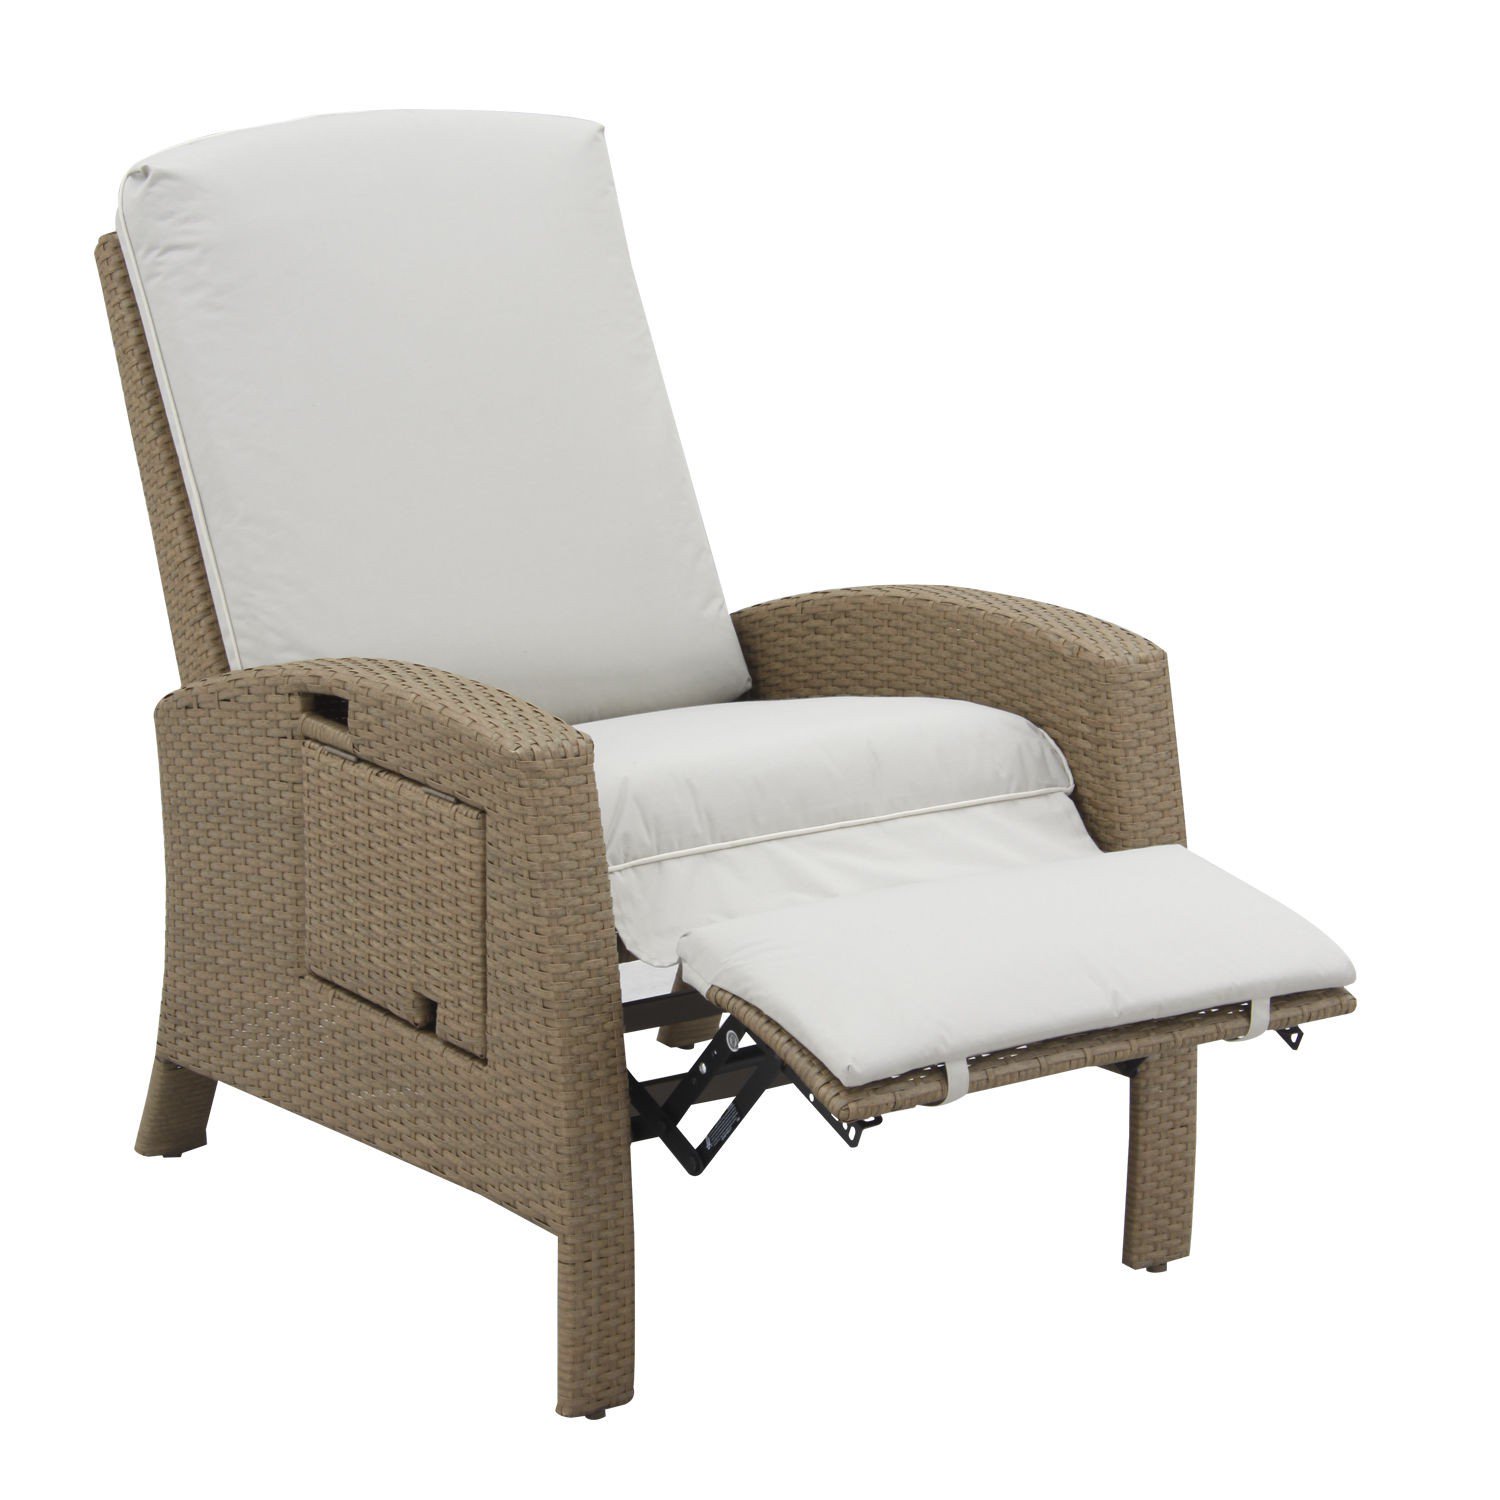 Rattan Outdoor Lounge Chair photo - 10